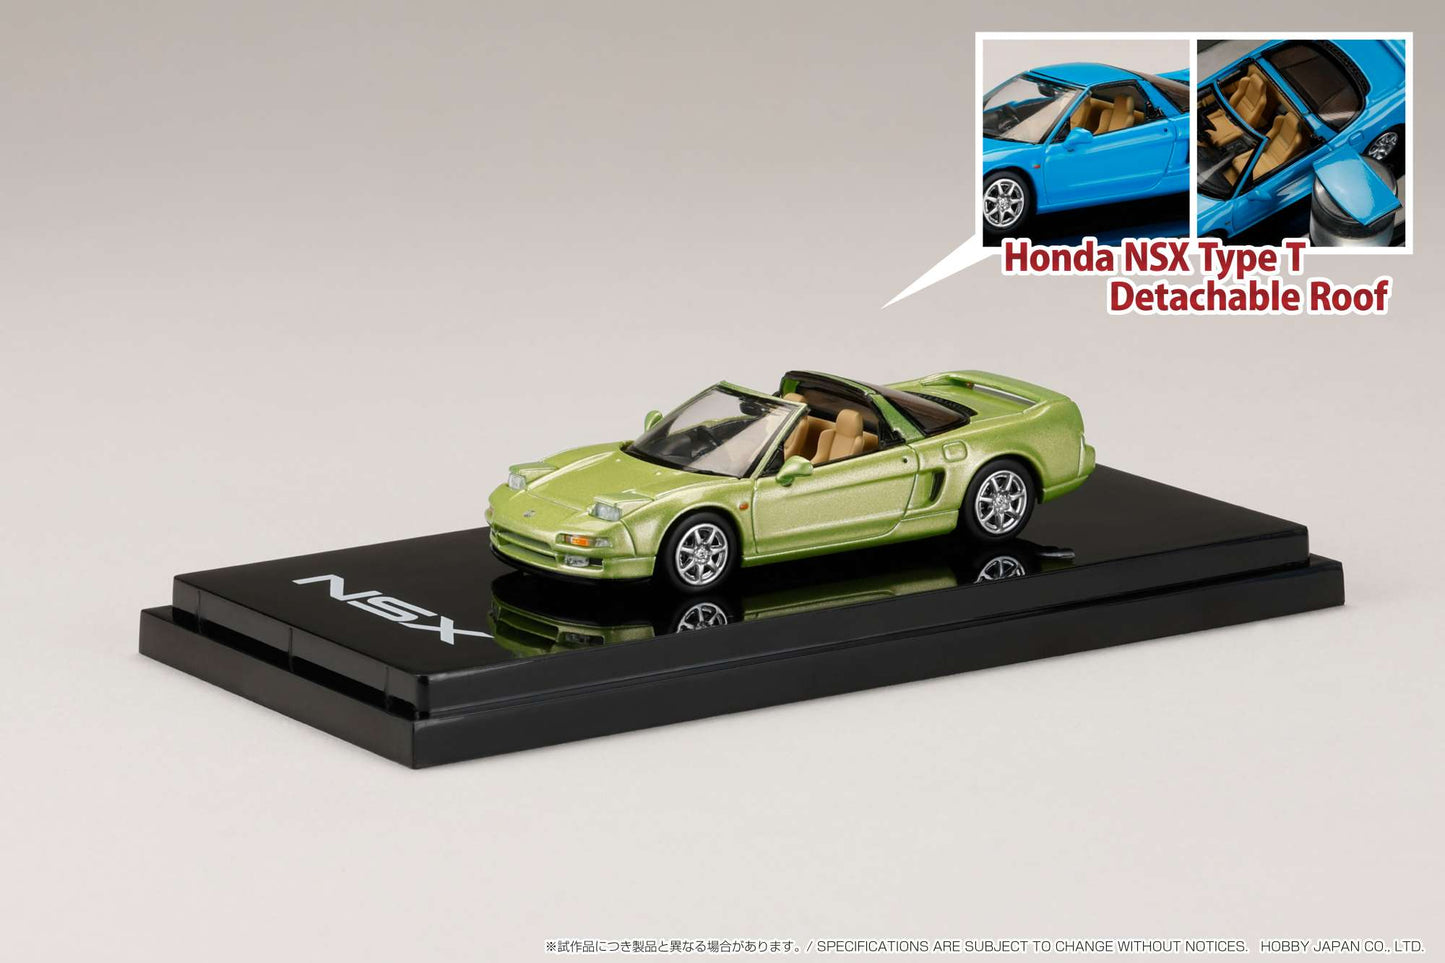 Hobby Japan 1/64 Honda NSX Type T with Detachable Roof in Lime Green Metallic